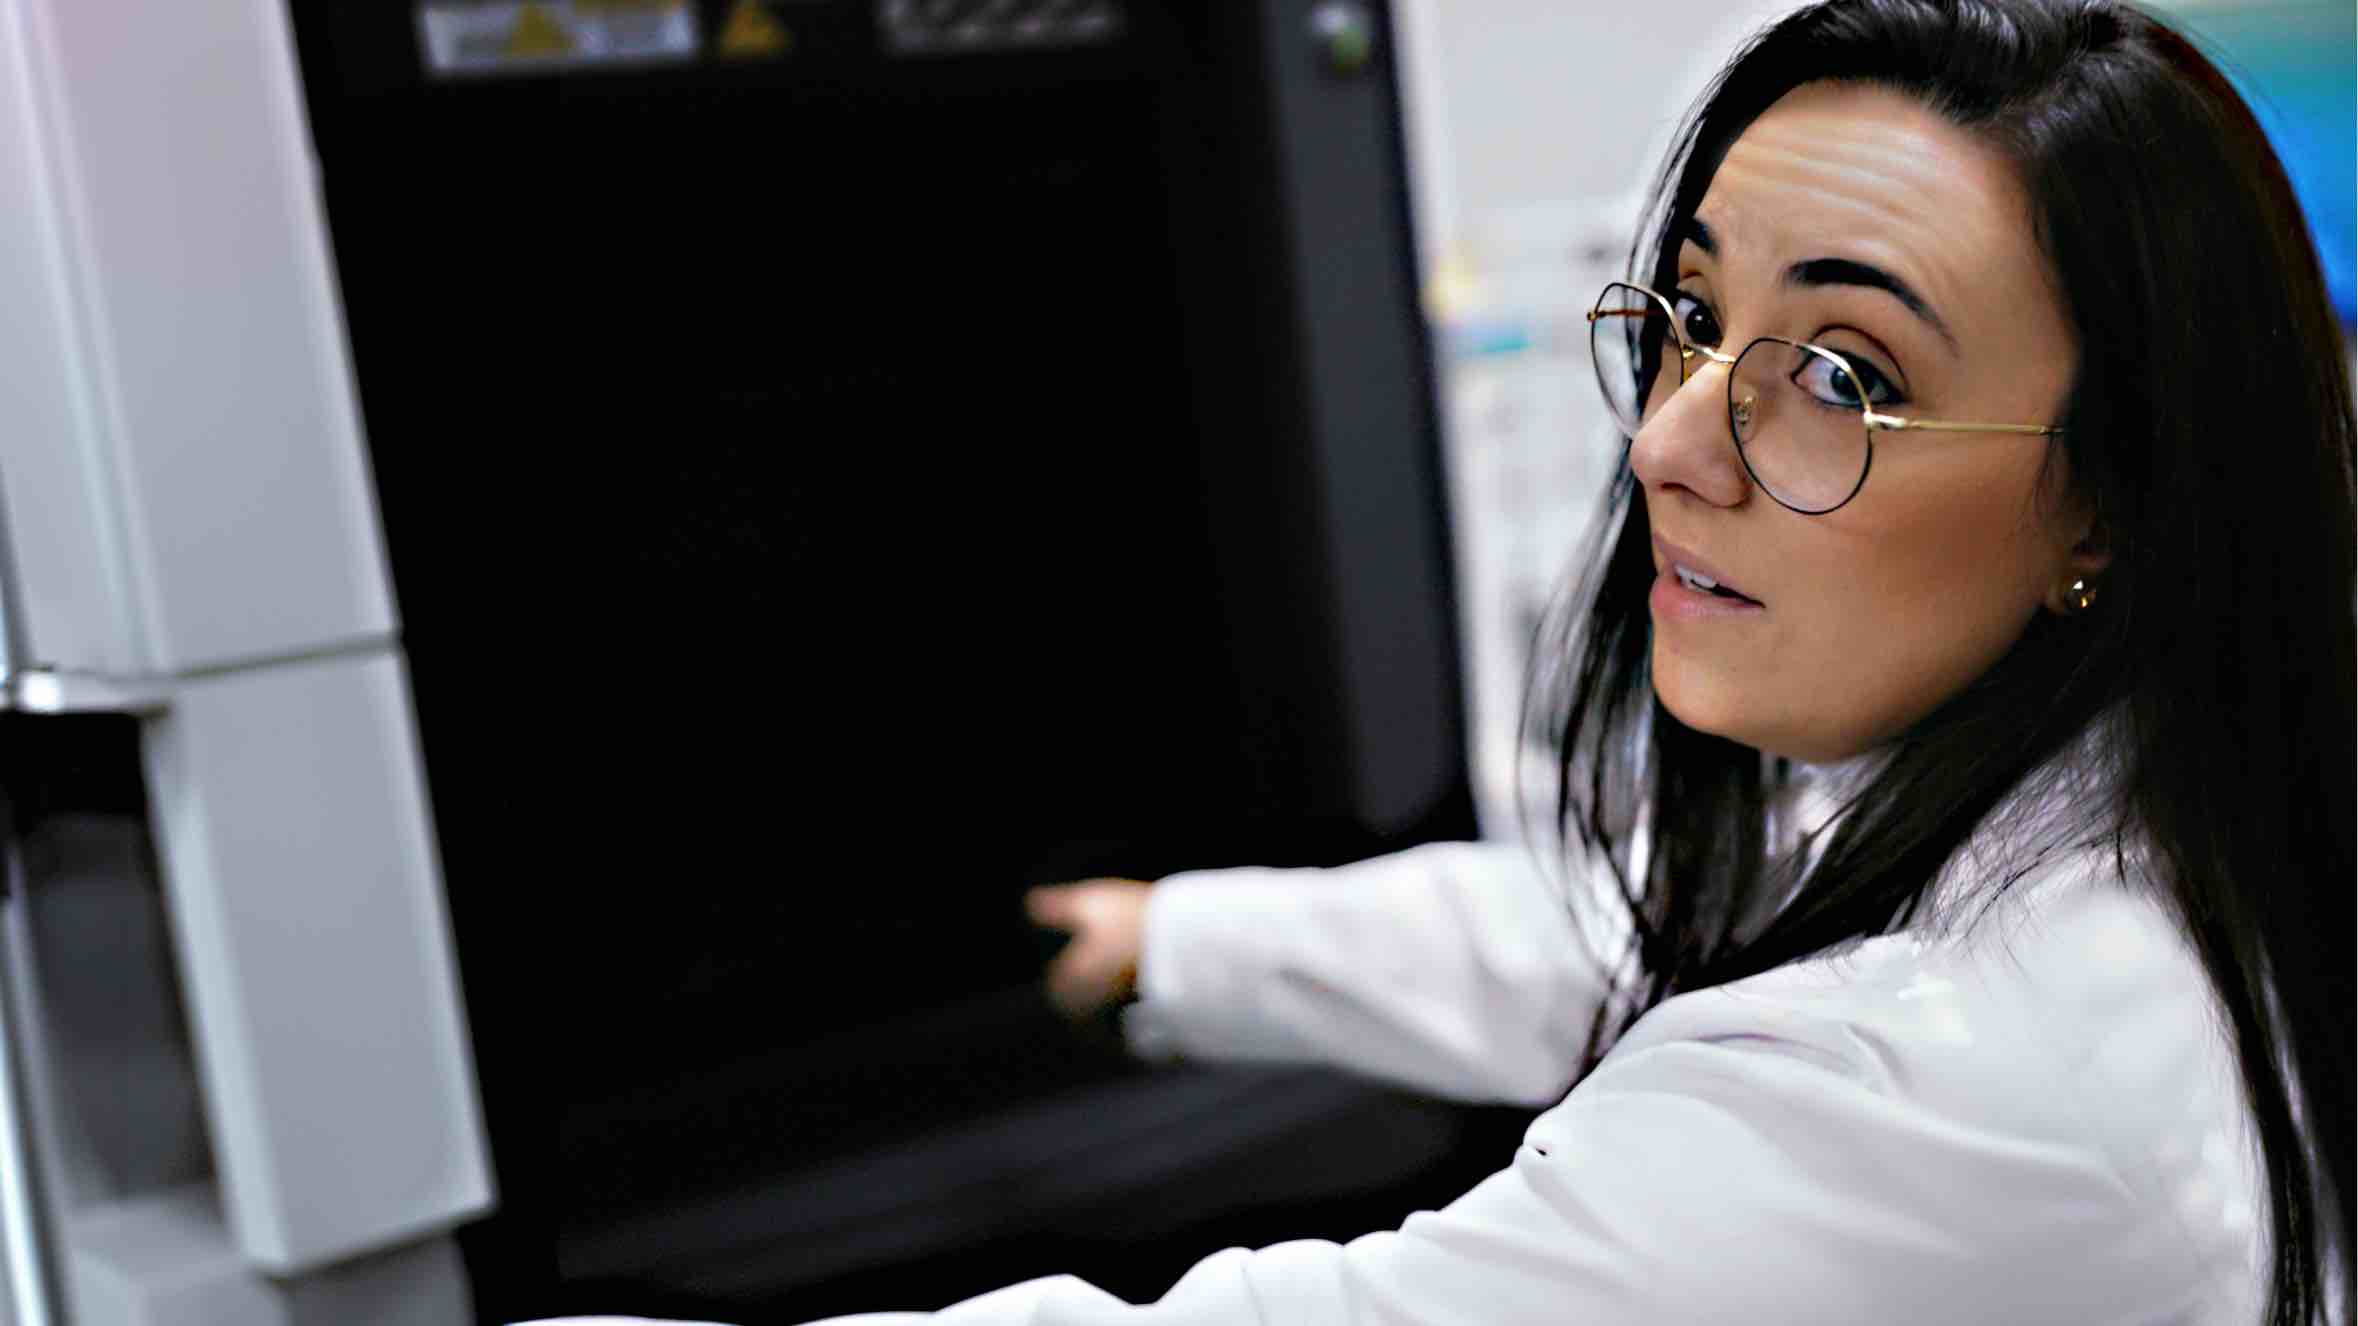 An individual in a lab coat and round glasses looking over their shoulder while working with laboratory equipment.